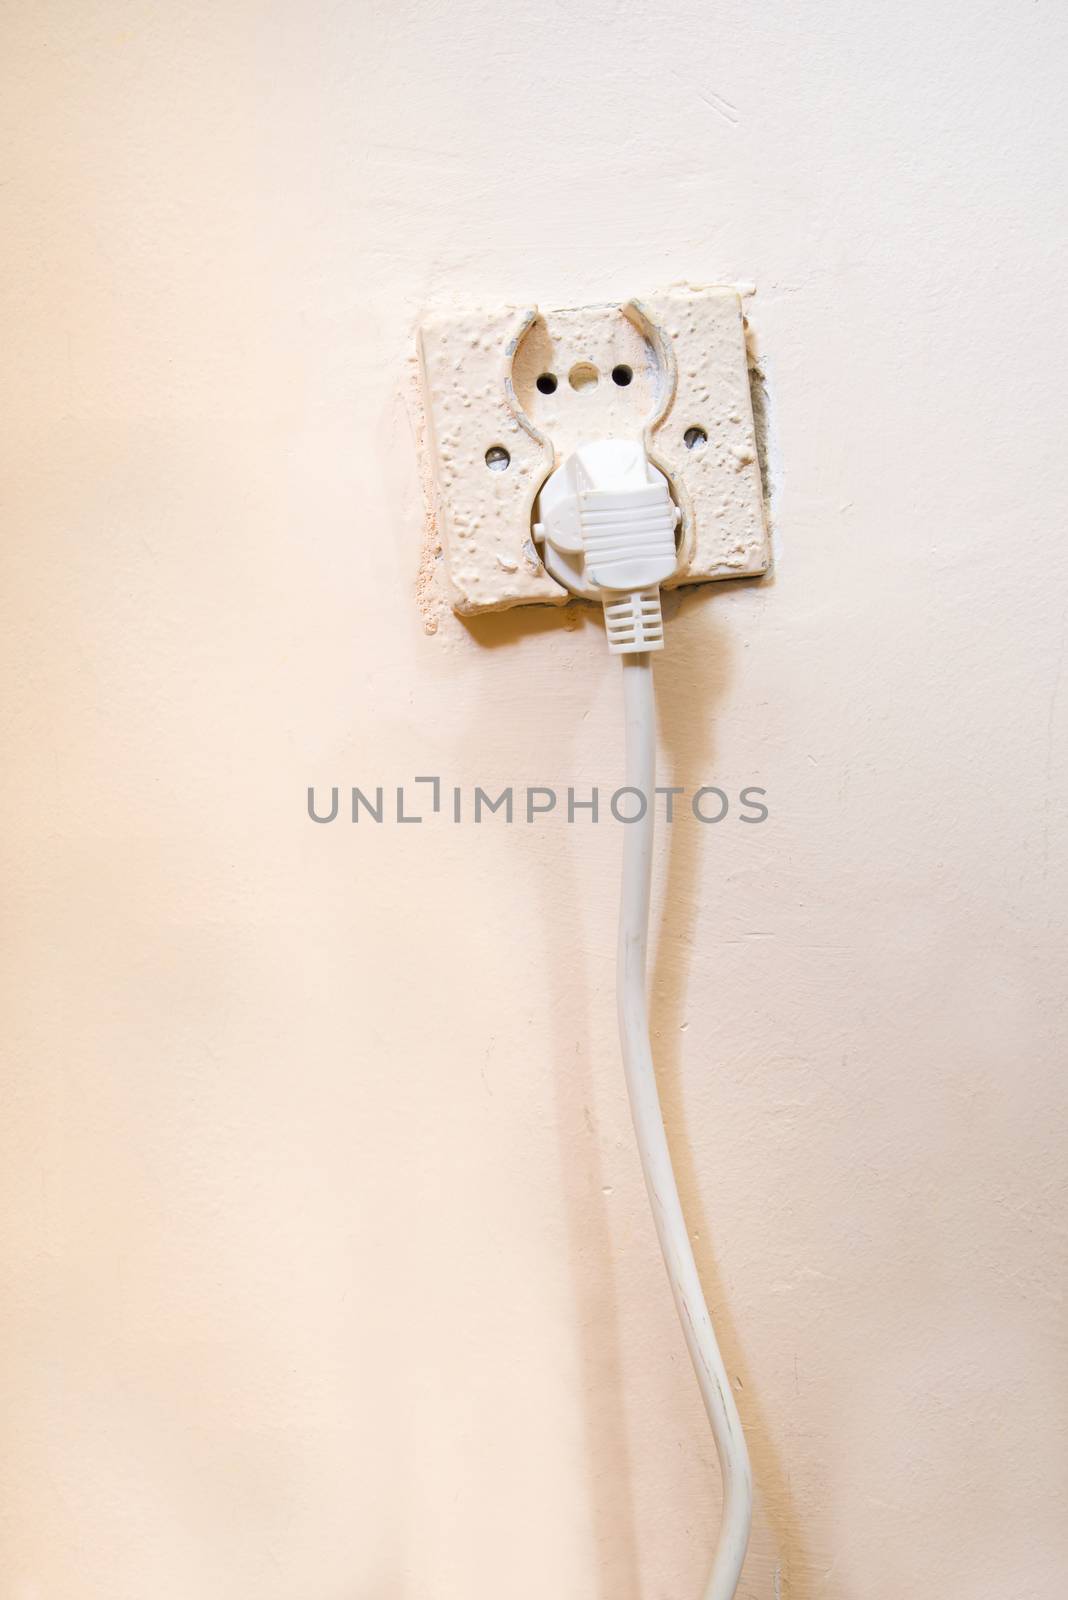 Old electrical socket with power cable pluged in